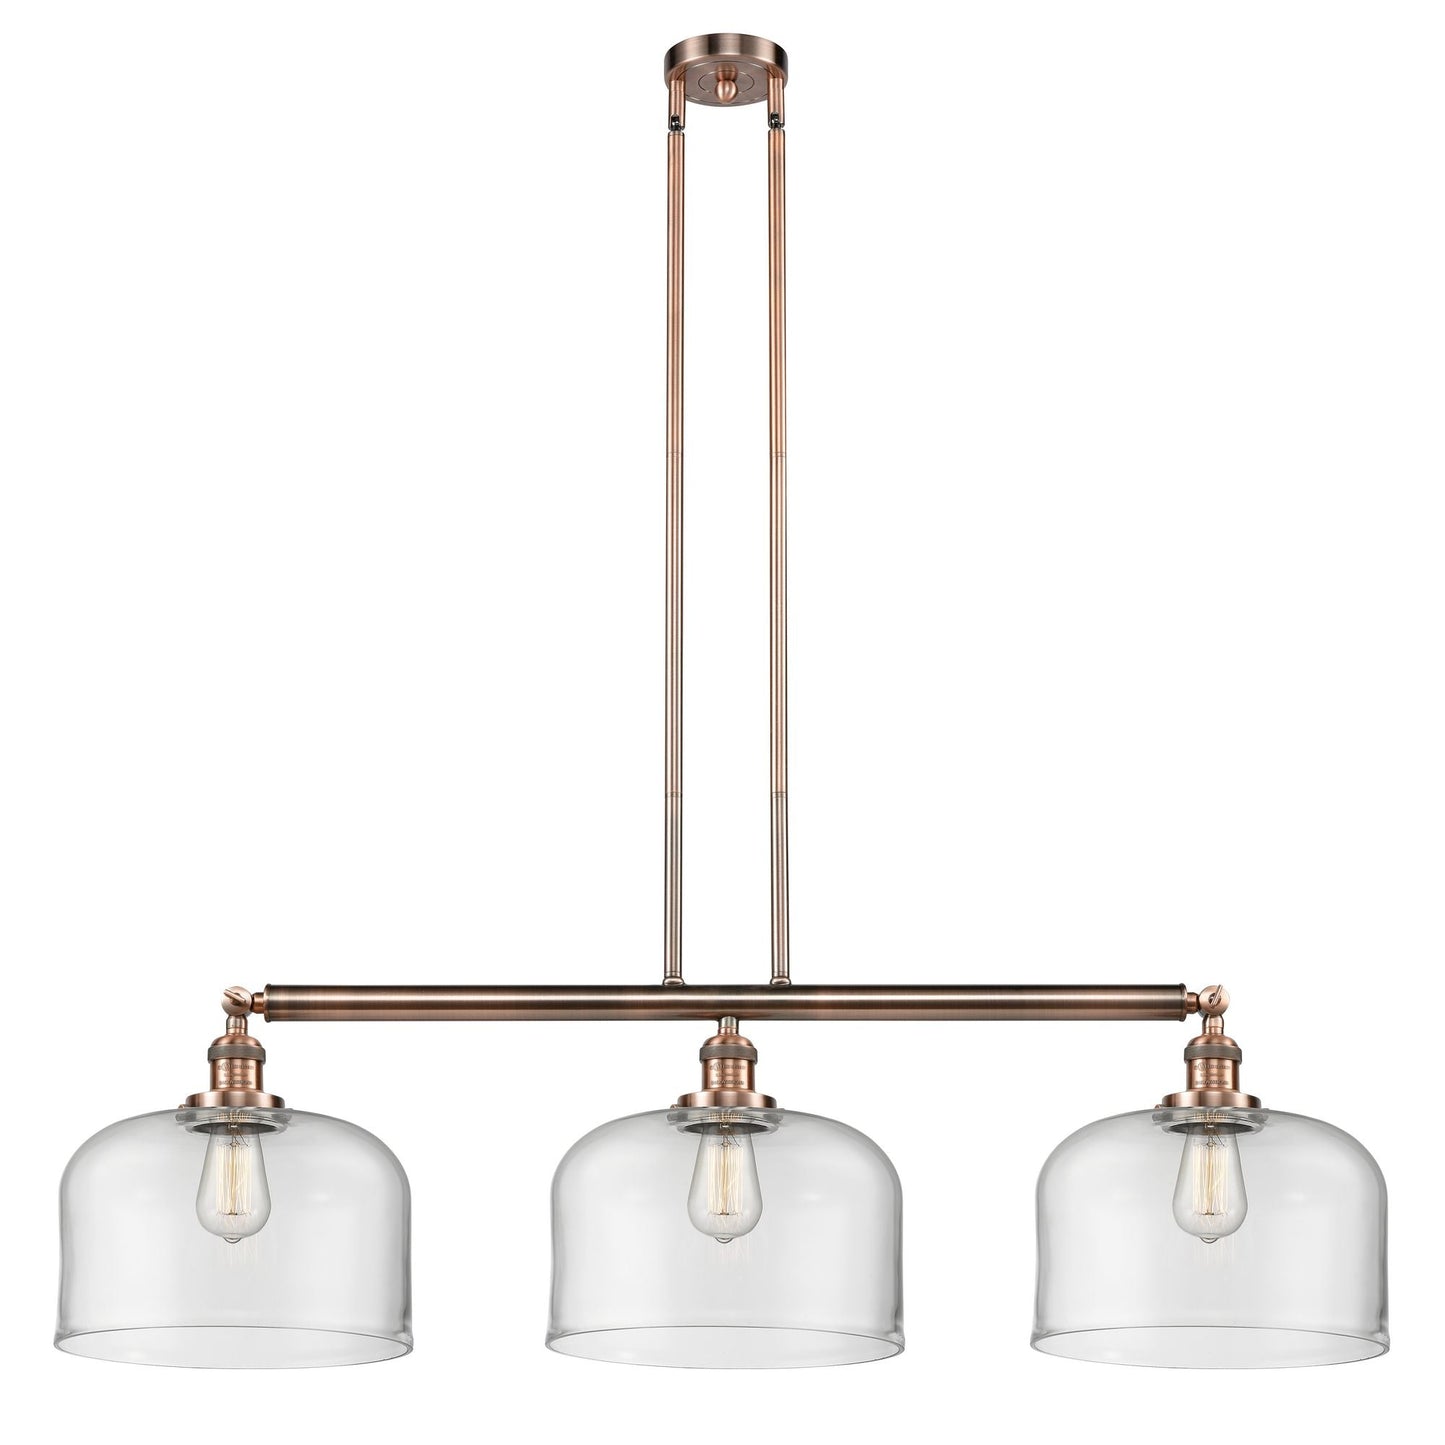 213-AC-G72-L 3-Light 42" Antique Copper Island Light - Clear X-Large Bell Glass - LED Bulb - Dimmensions: 42 x 12 x 13<br>Minimum Height : 22.25<br>Maximum Height : 46.25 - Sloped Ceiling Compatible: Yes